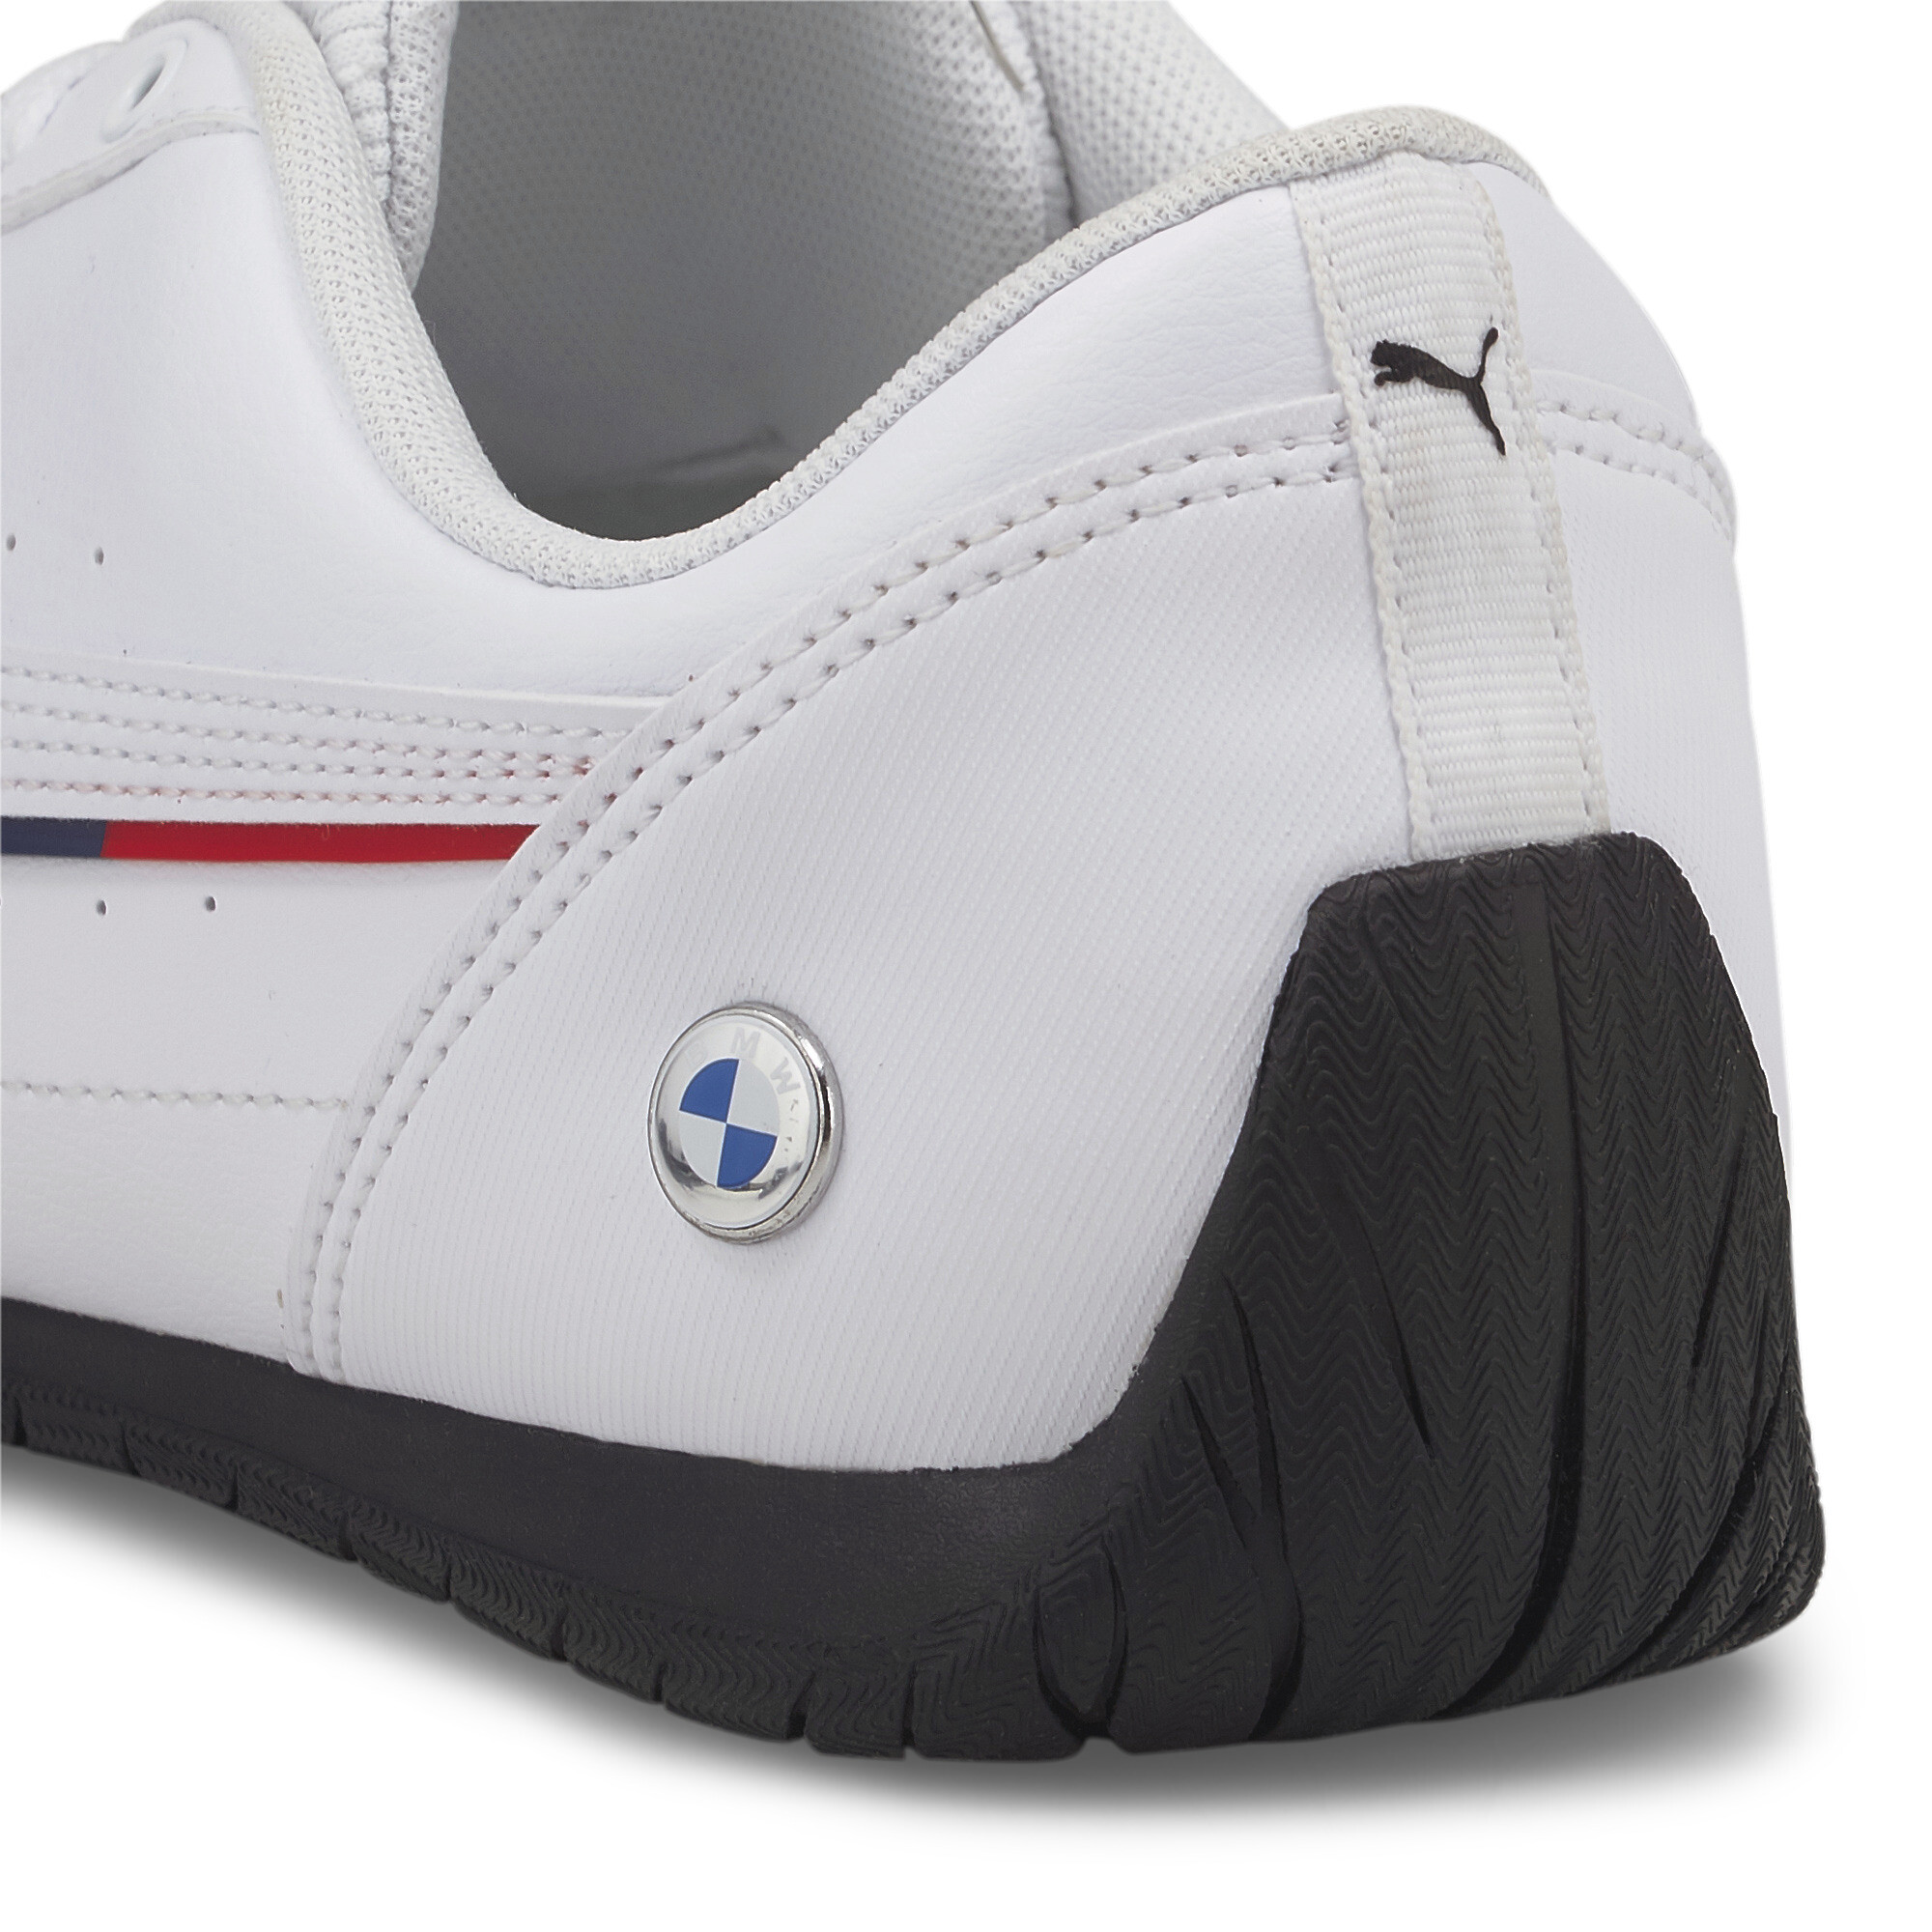 Puma BMW M Motorsport Neo Cat Racing Shoes, White, Size 40, Shoes